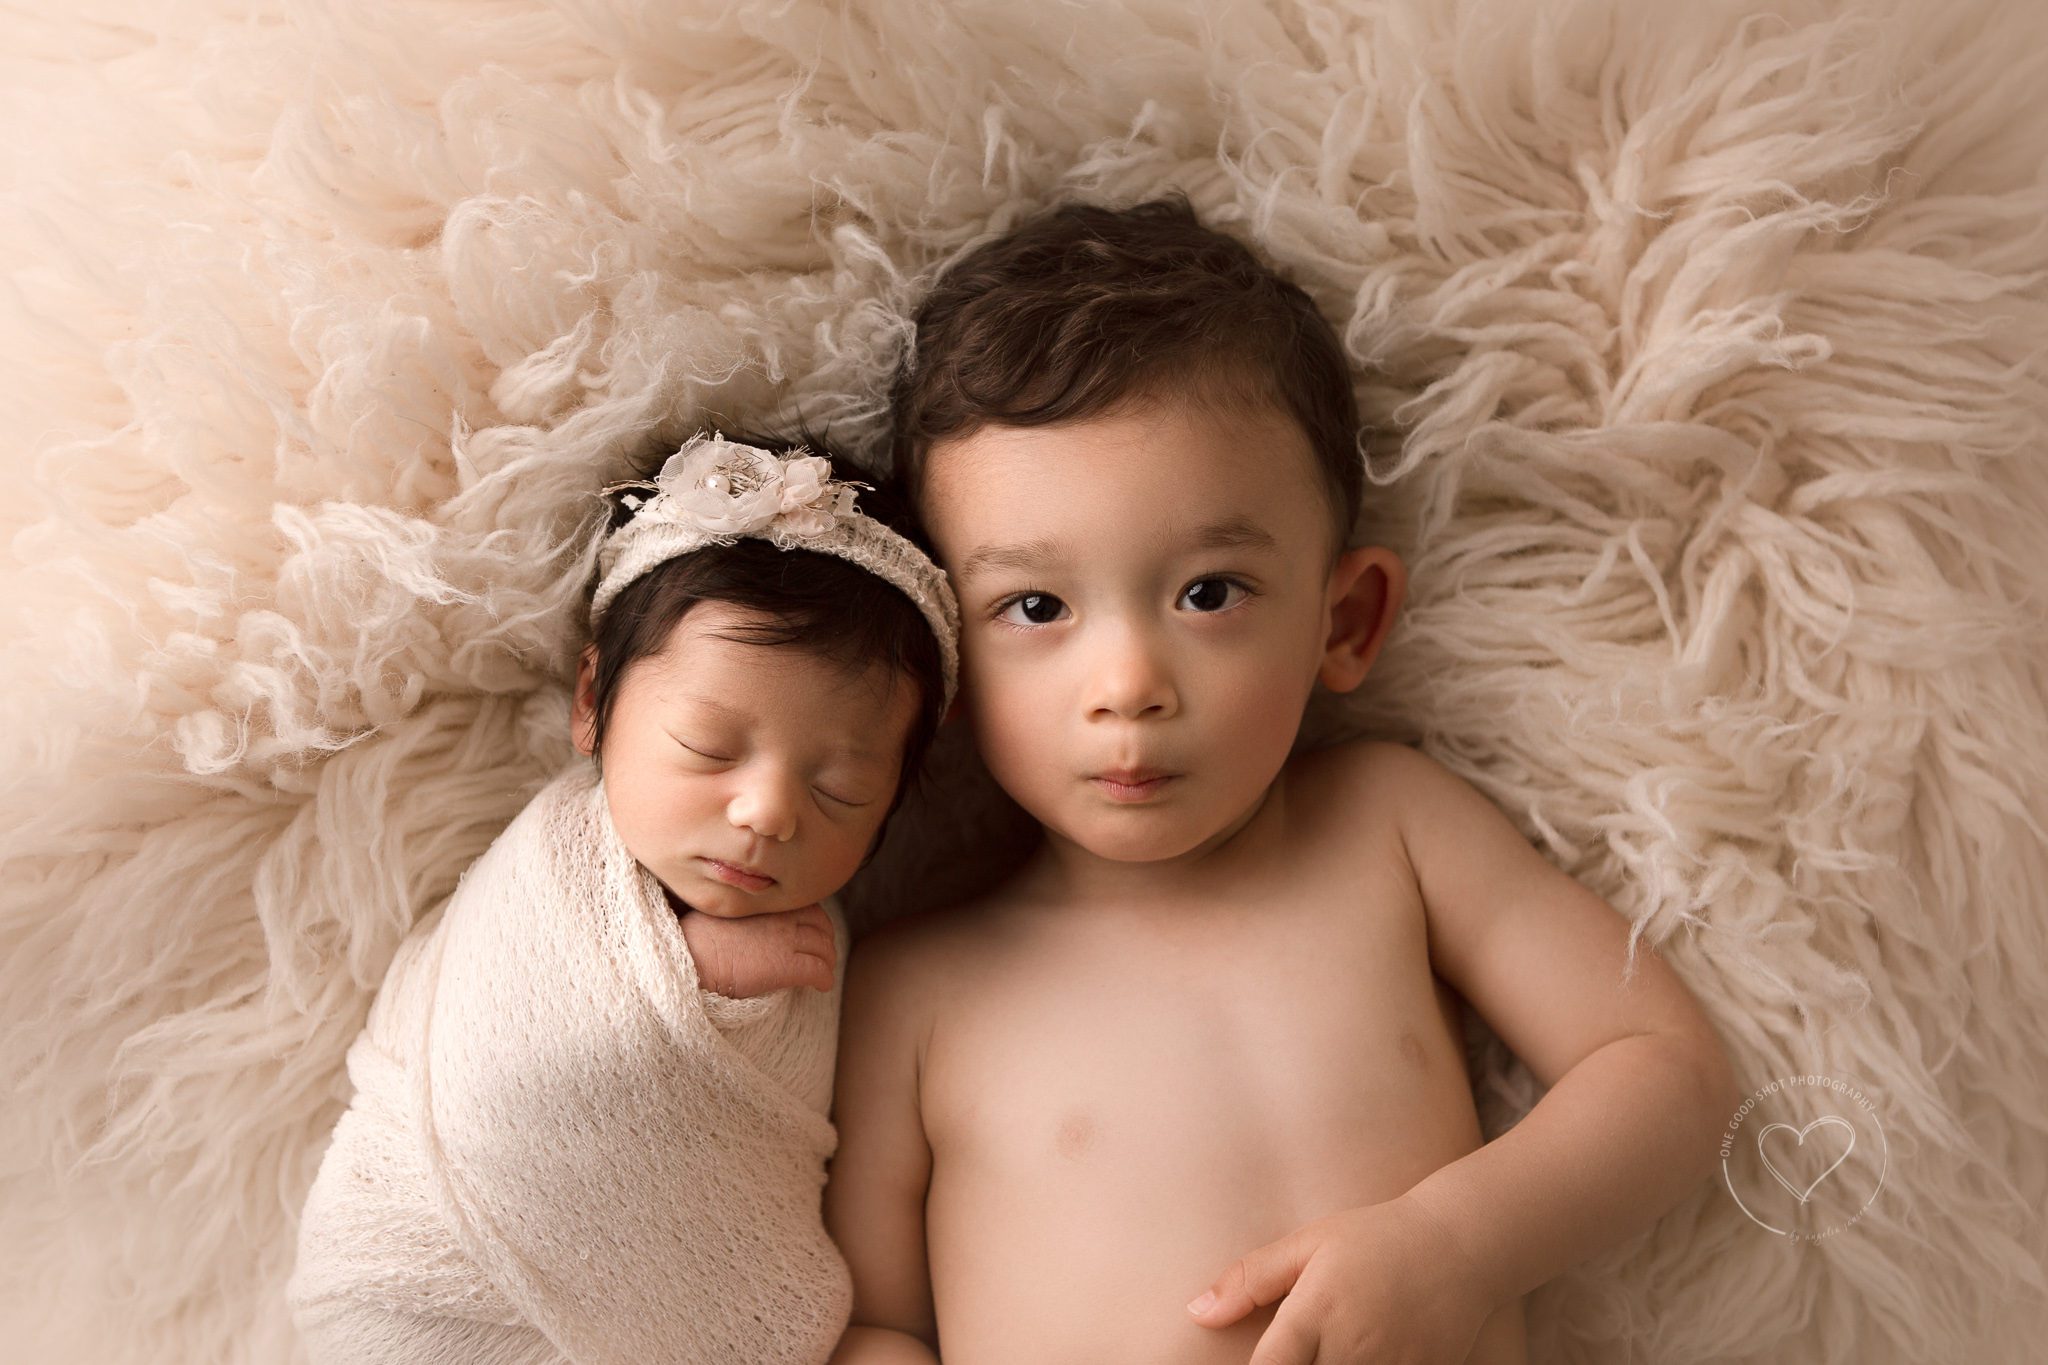 Sibling photo, Big brother lying next to newborn sister, baby girl wrapped in white wearing floral headband, fresno newborn photographer 